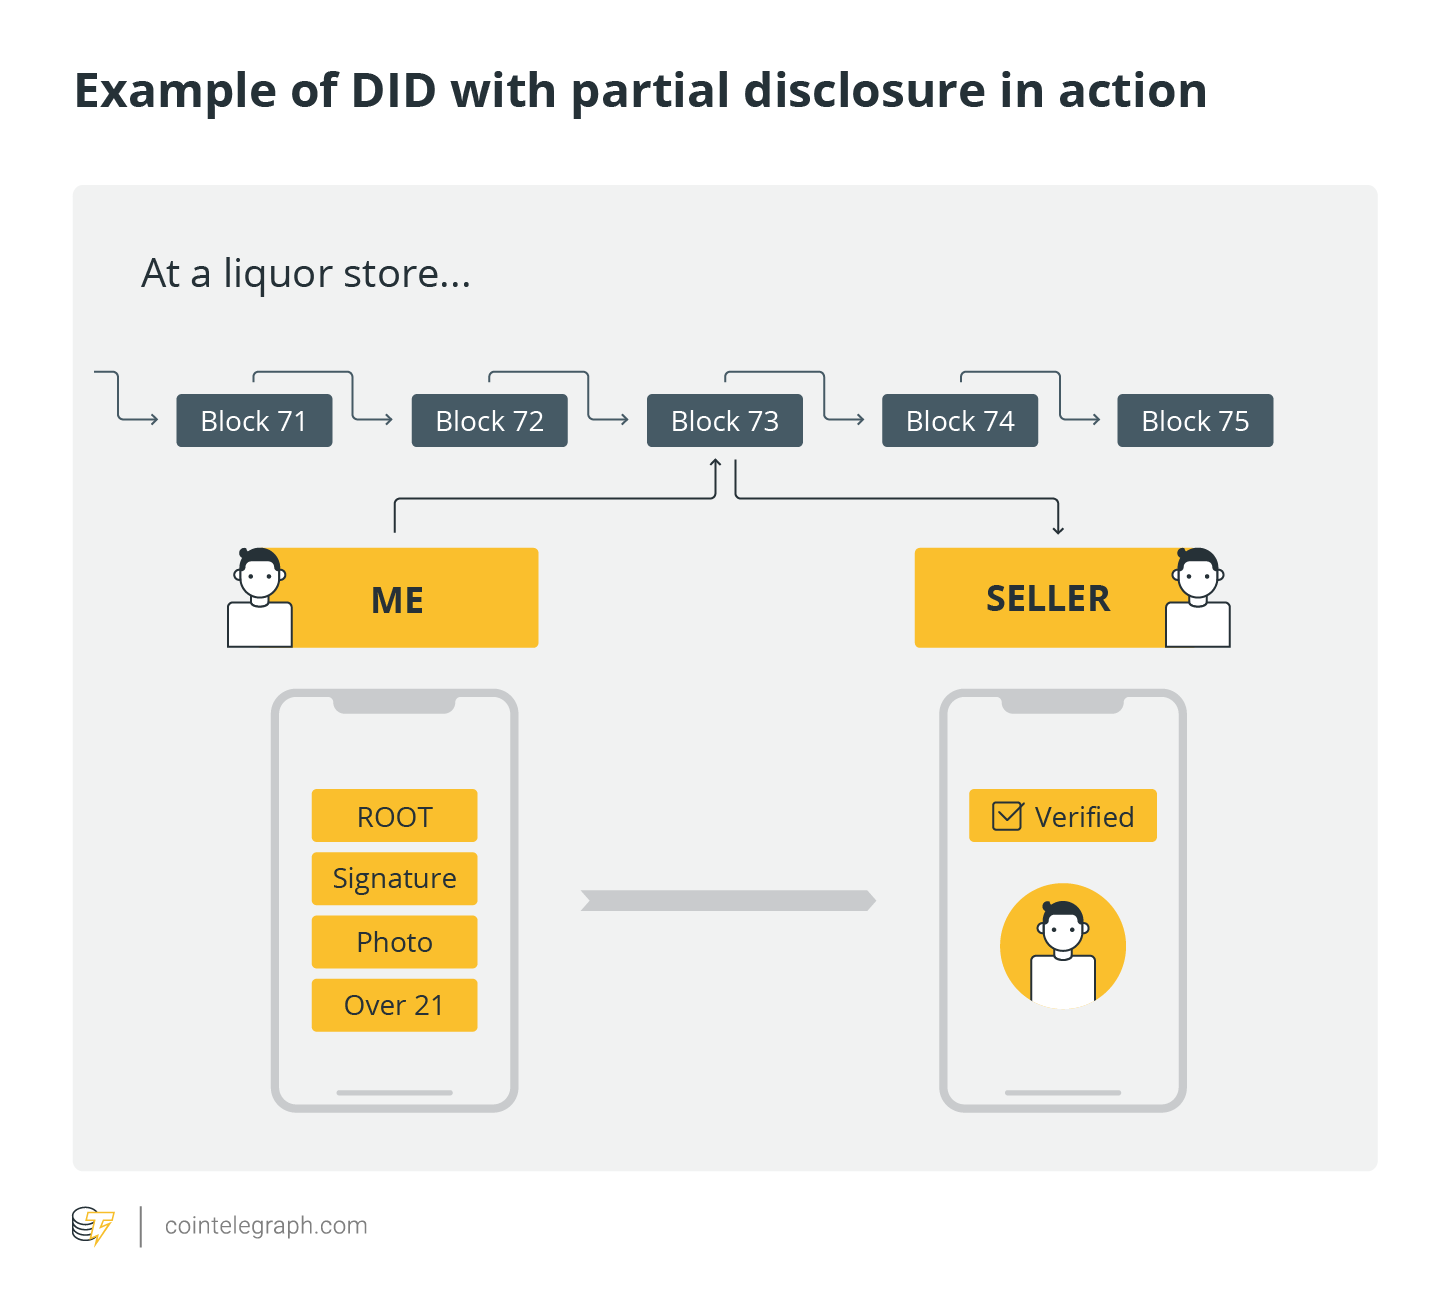 Example of DID with partial disclosure in action